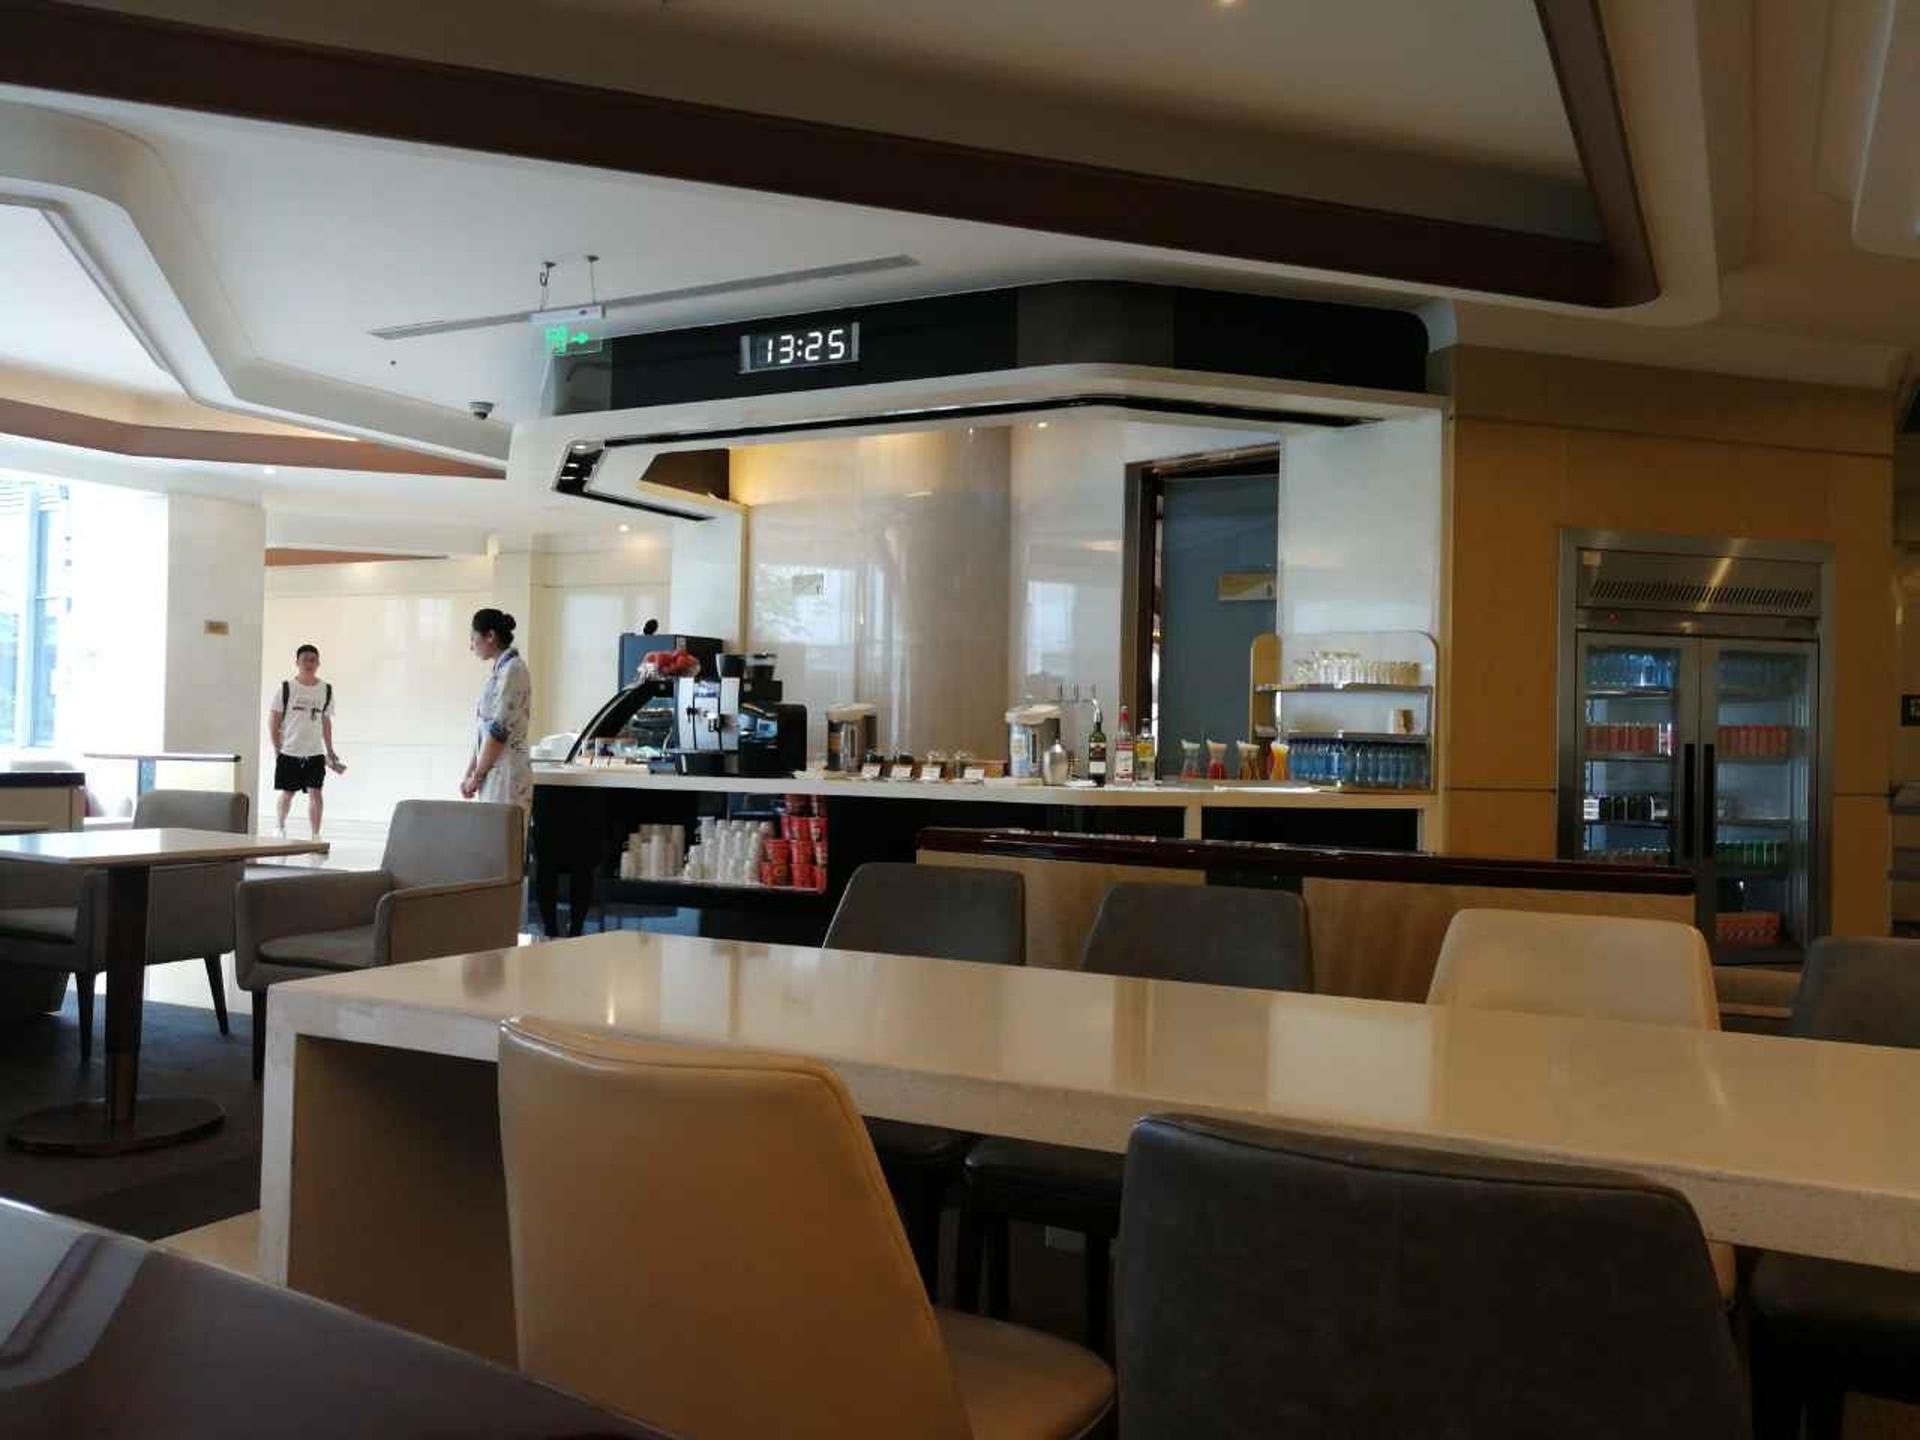 Hainan Airlines Fortune Wings Lounge image 2 of 2